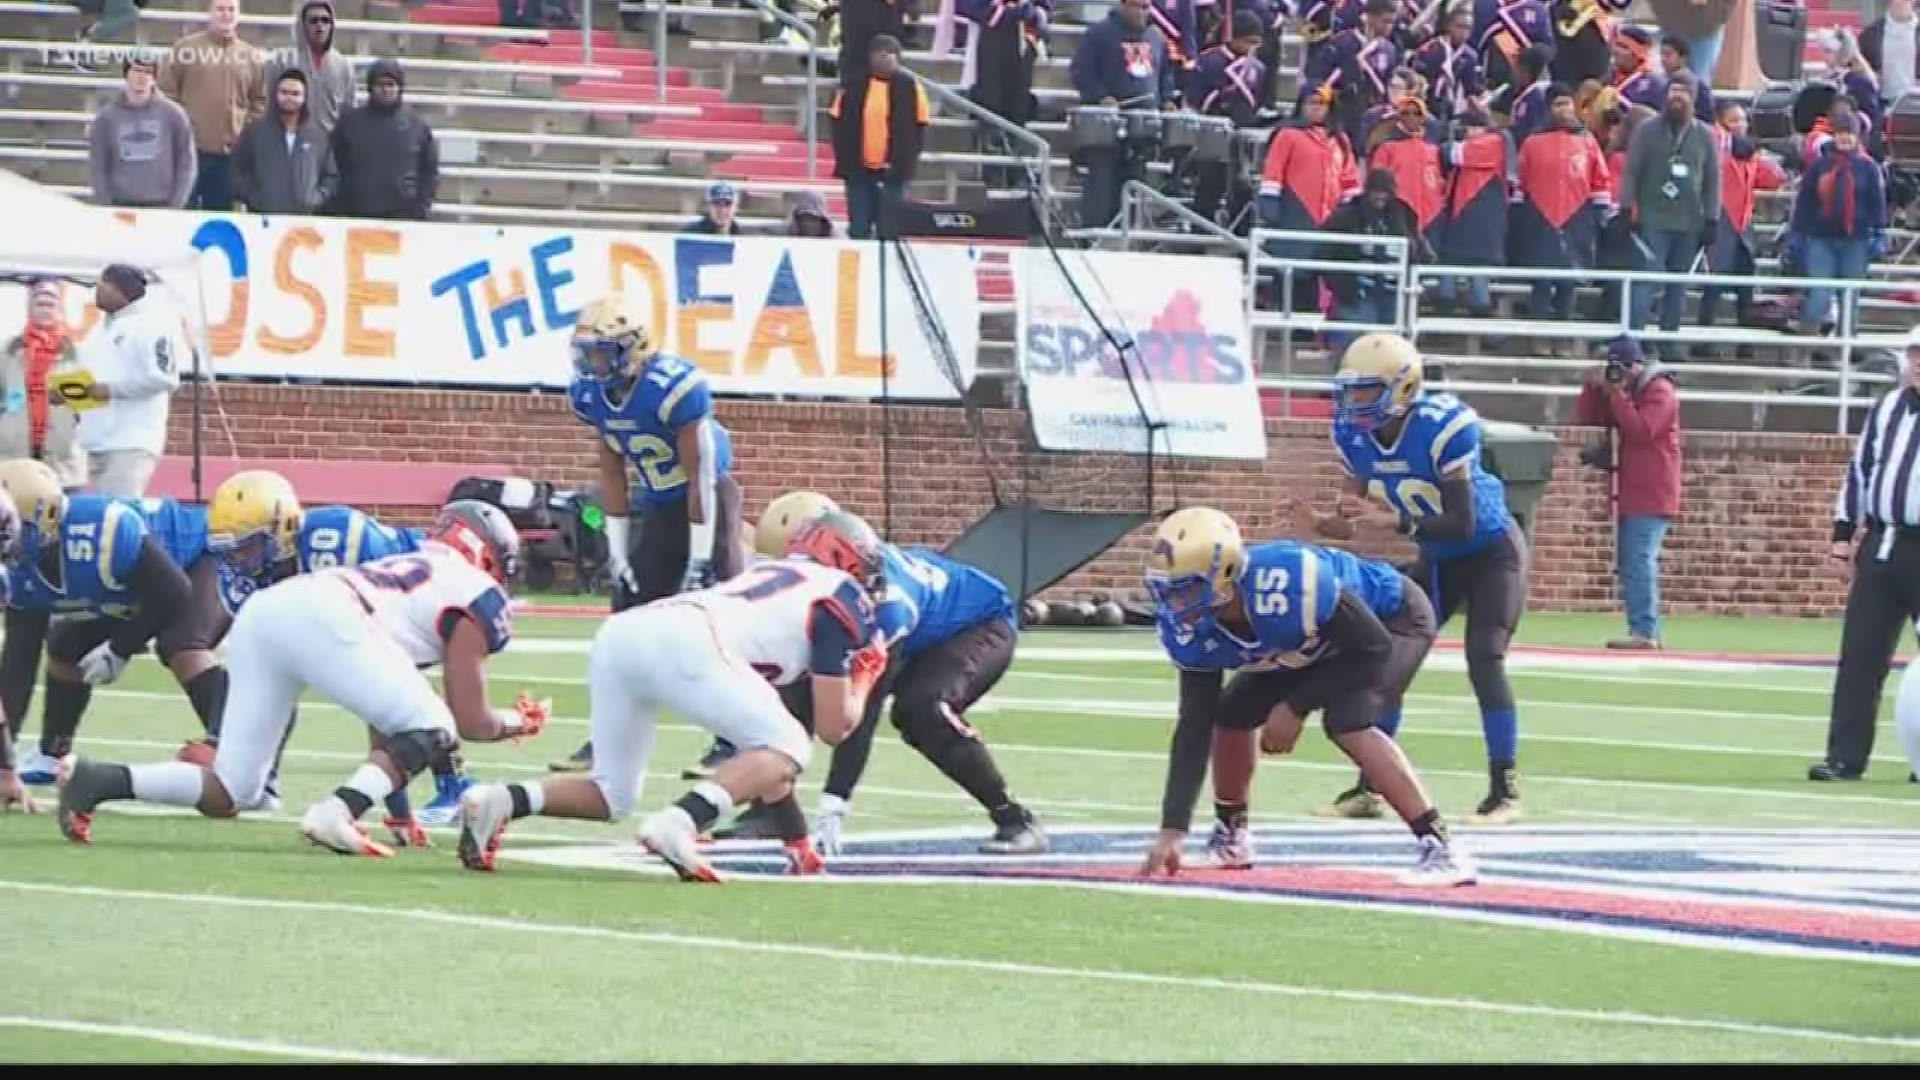 Phoebus had no answers for Heritage's, Jabari Blake who had 3 touchdown runs and Phantoms got edged by the Pioneers in the Class 3A finals 24-20. The Phantoms were denied a chance at an 8th state title.